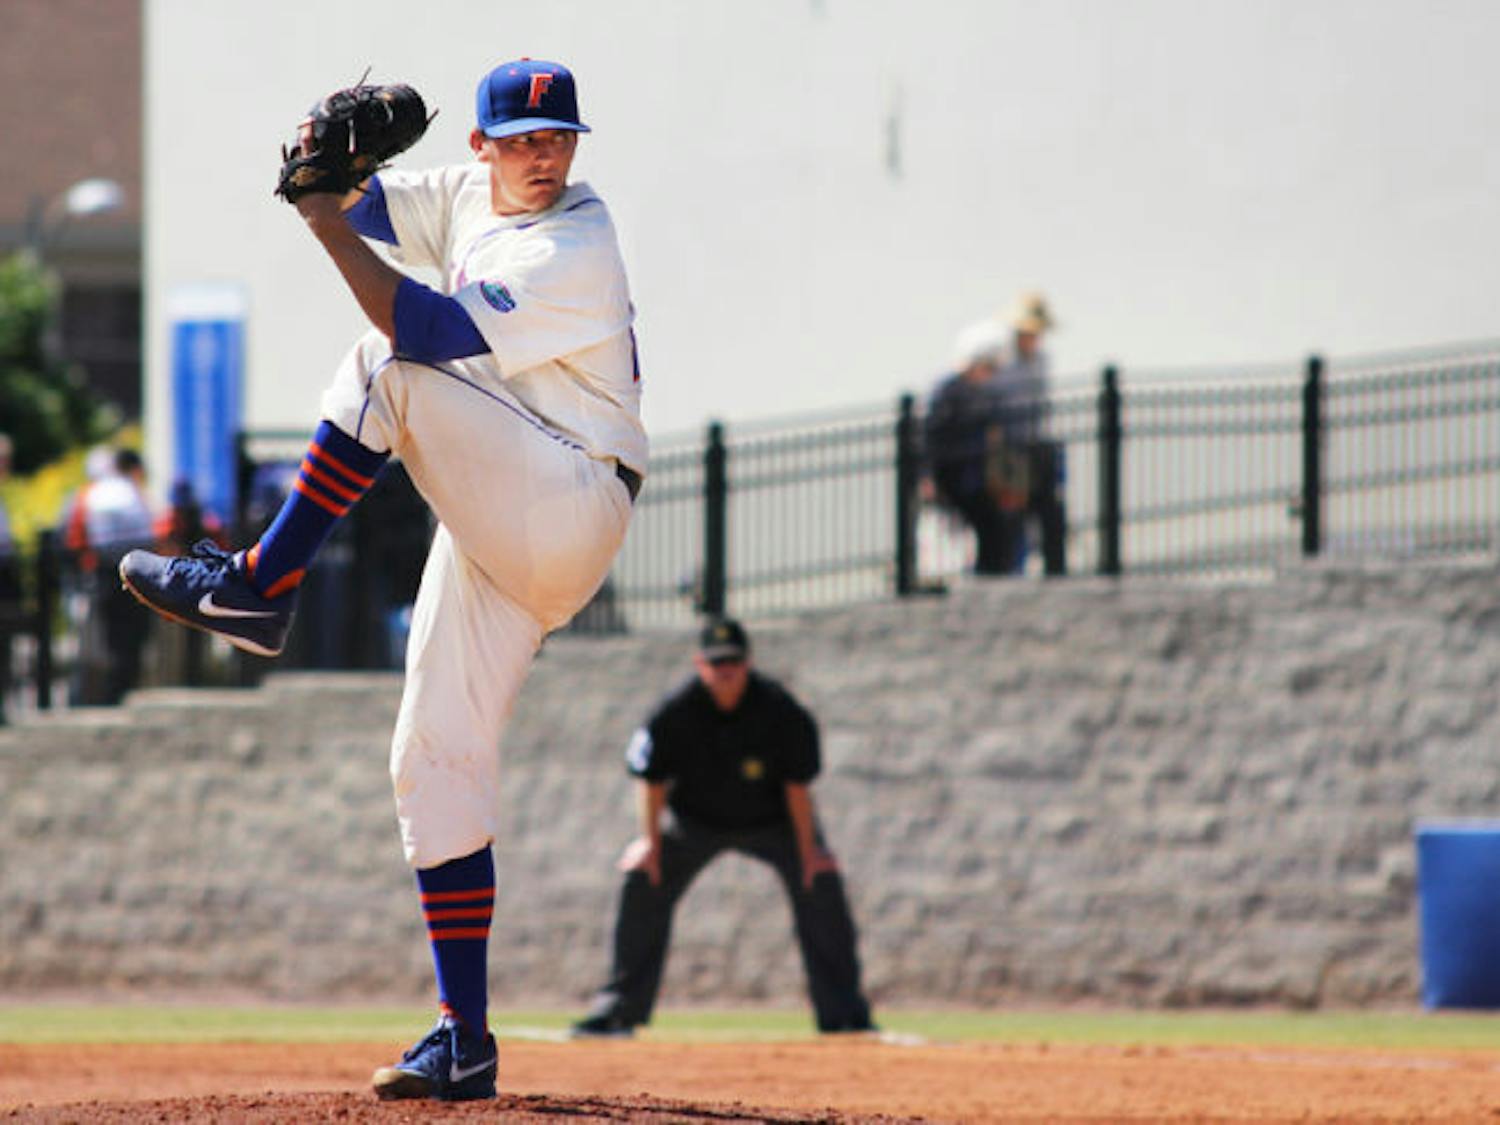 Junior Jonathon Crawford pitches during Florida’s 11-5 loss to Kentucky on March 16 at McKethan Stadium. Crawford&nbsp;allowed just one run in 6.2 innings Thursday against the Bulldogs.